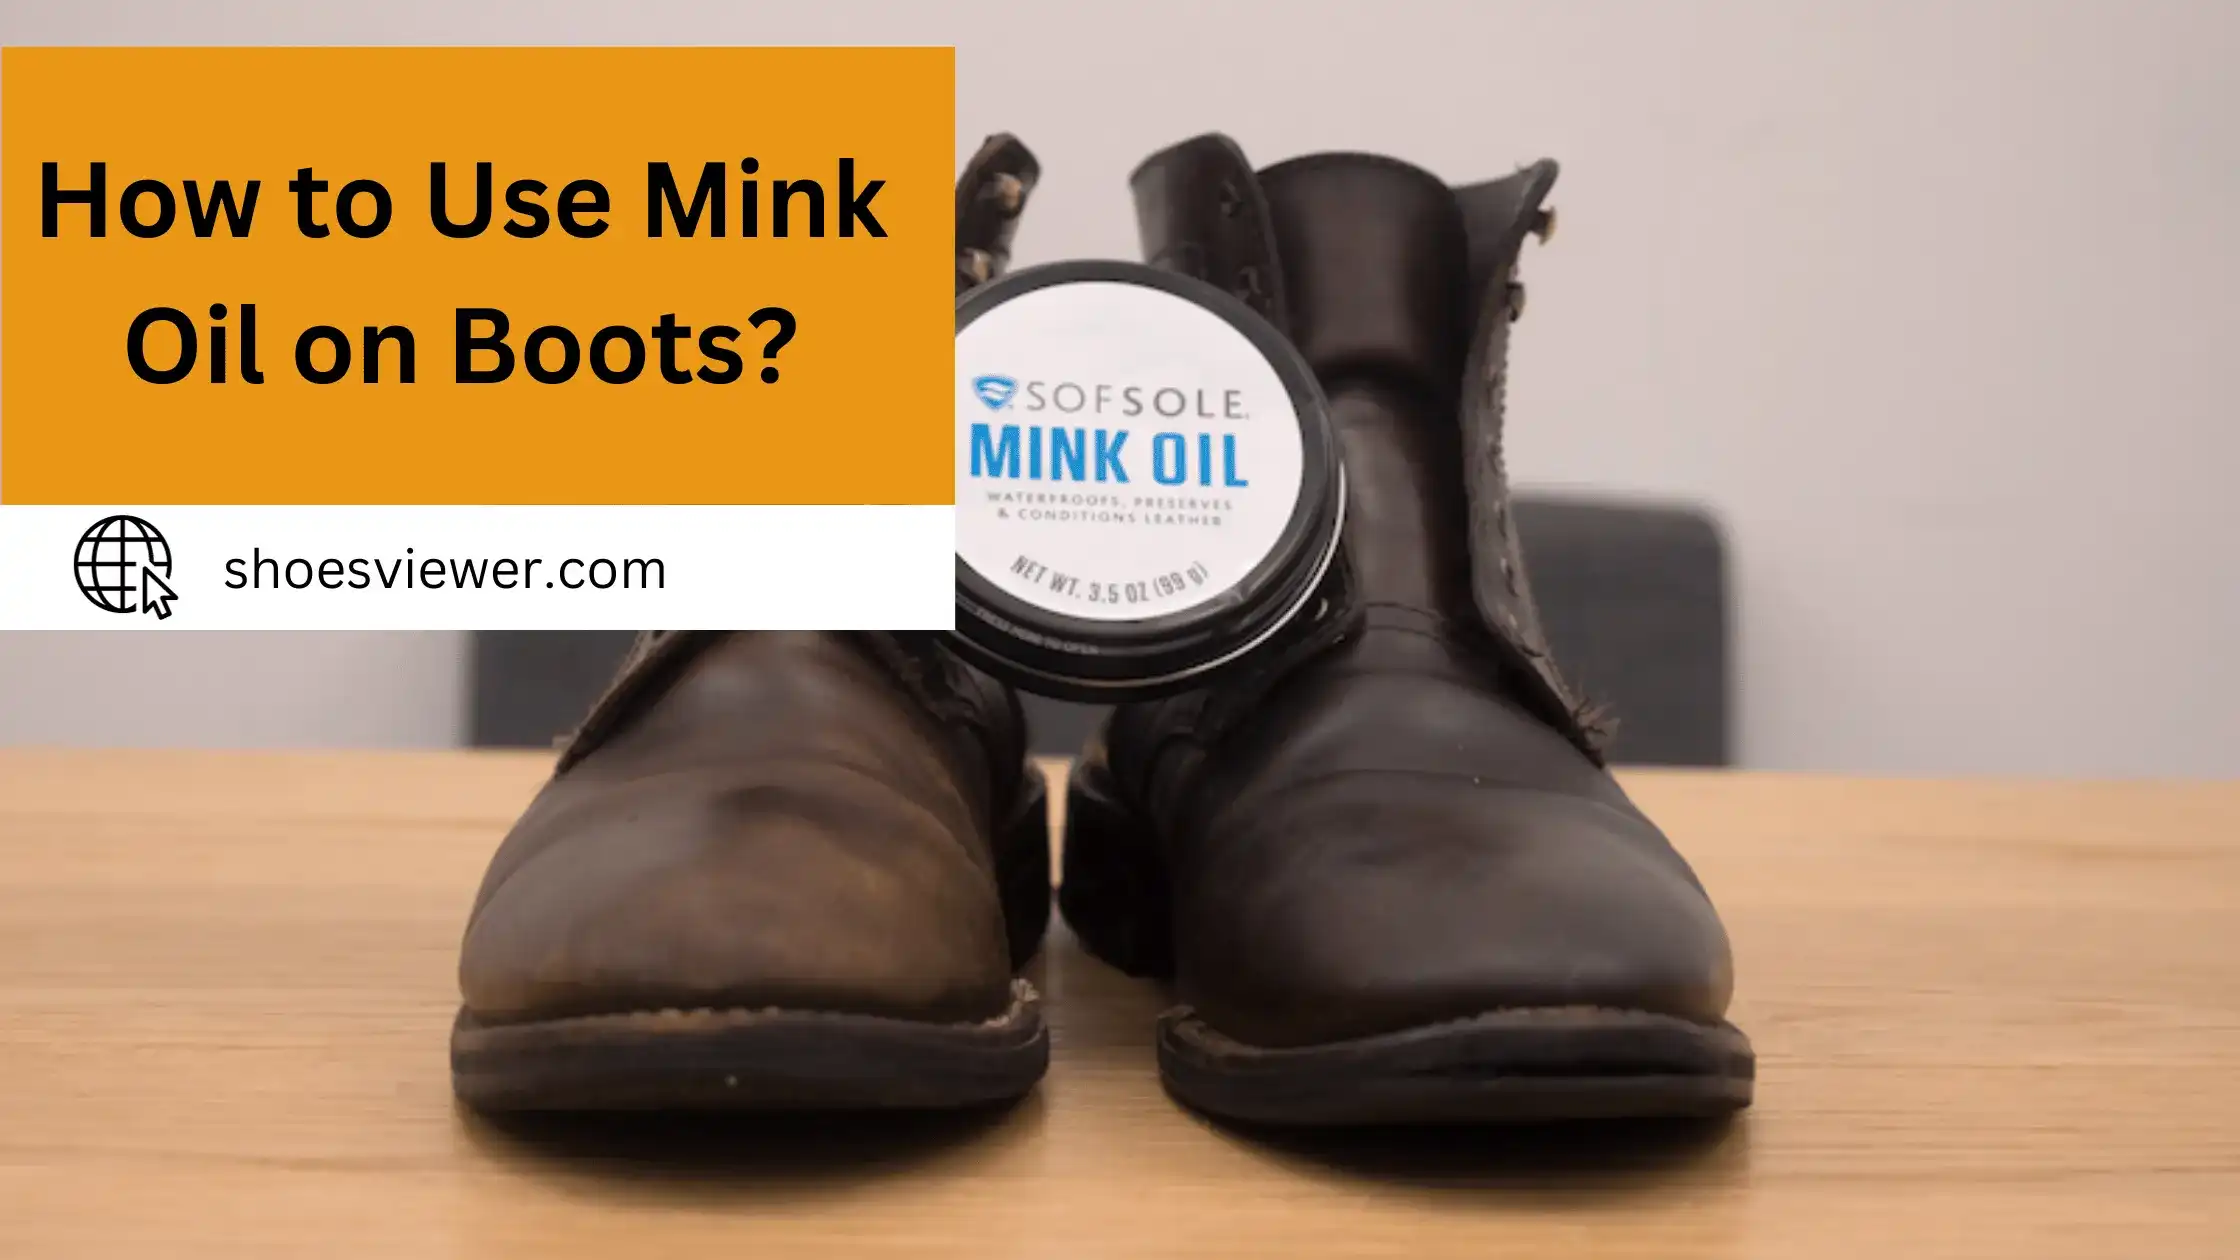 How To Use Mink Oil On Boots? Step By Step Guide